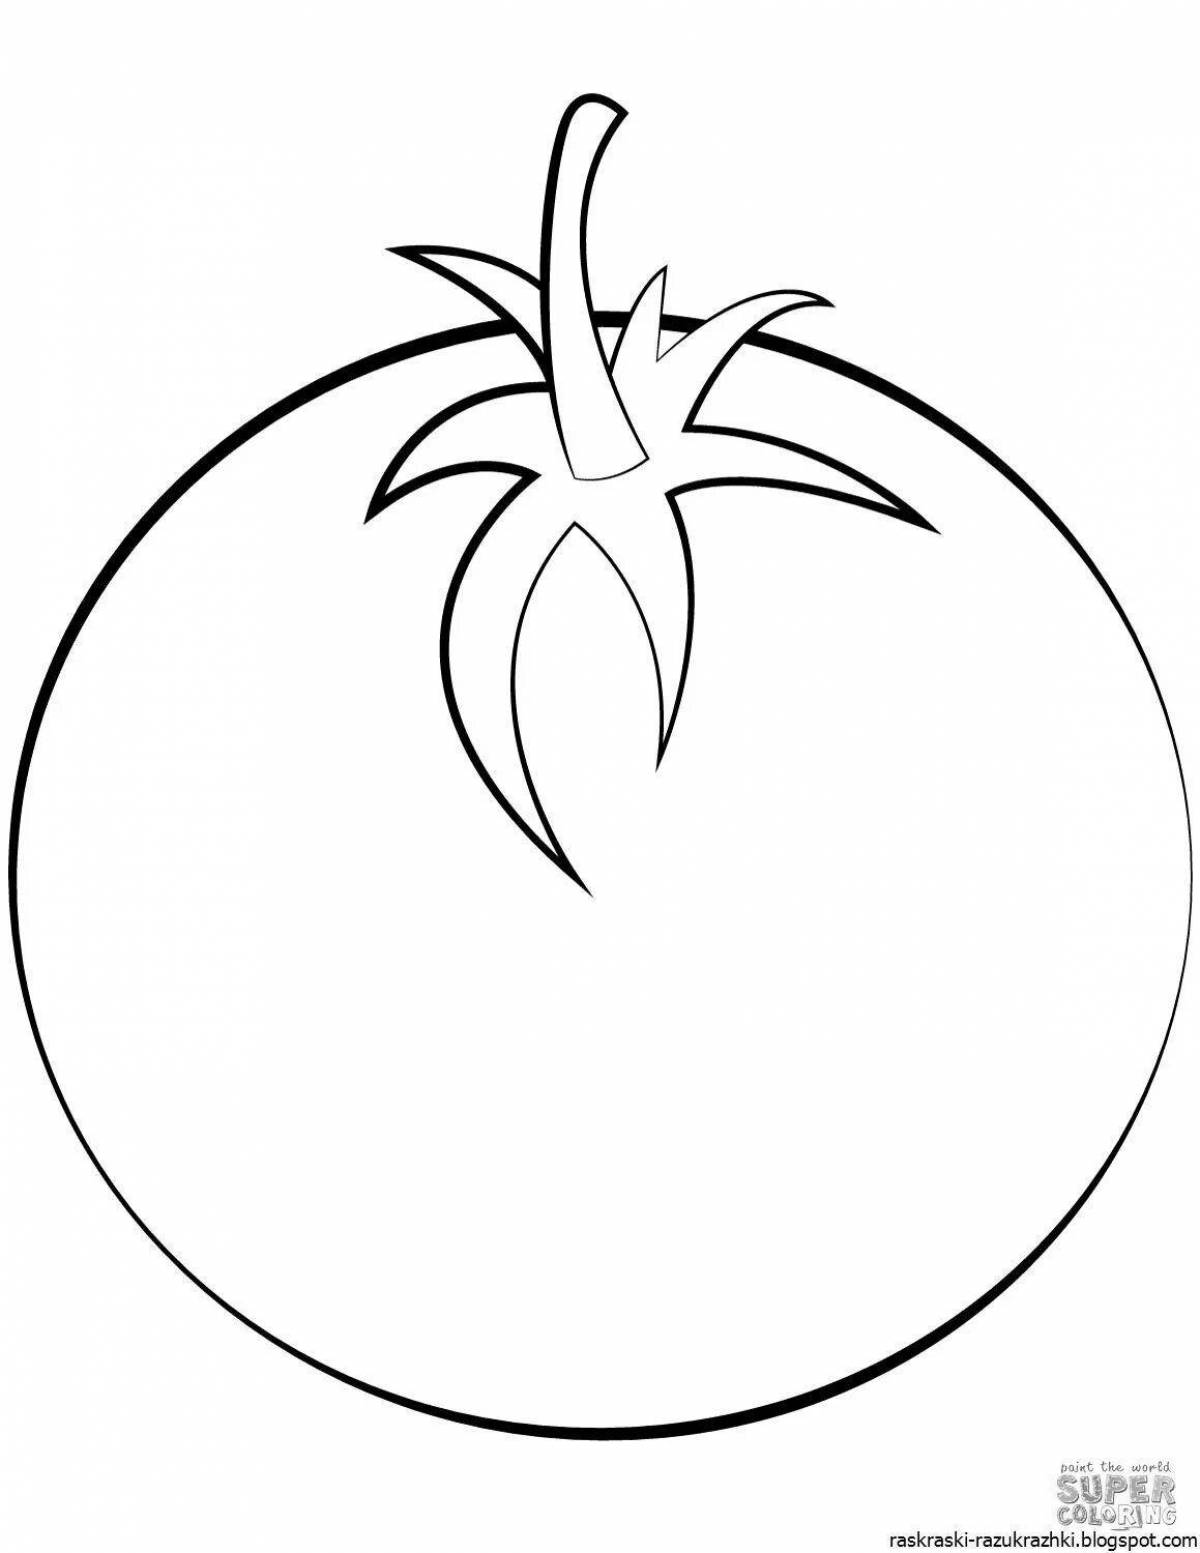 Colorful tomato and cucumber coloring page